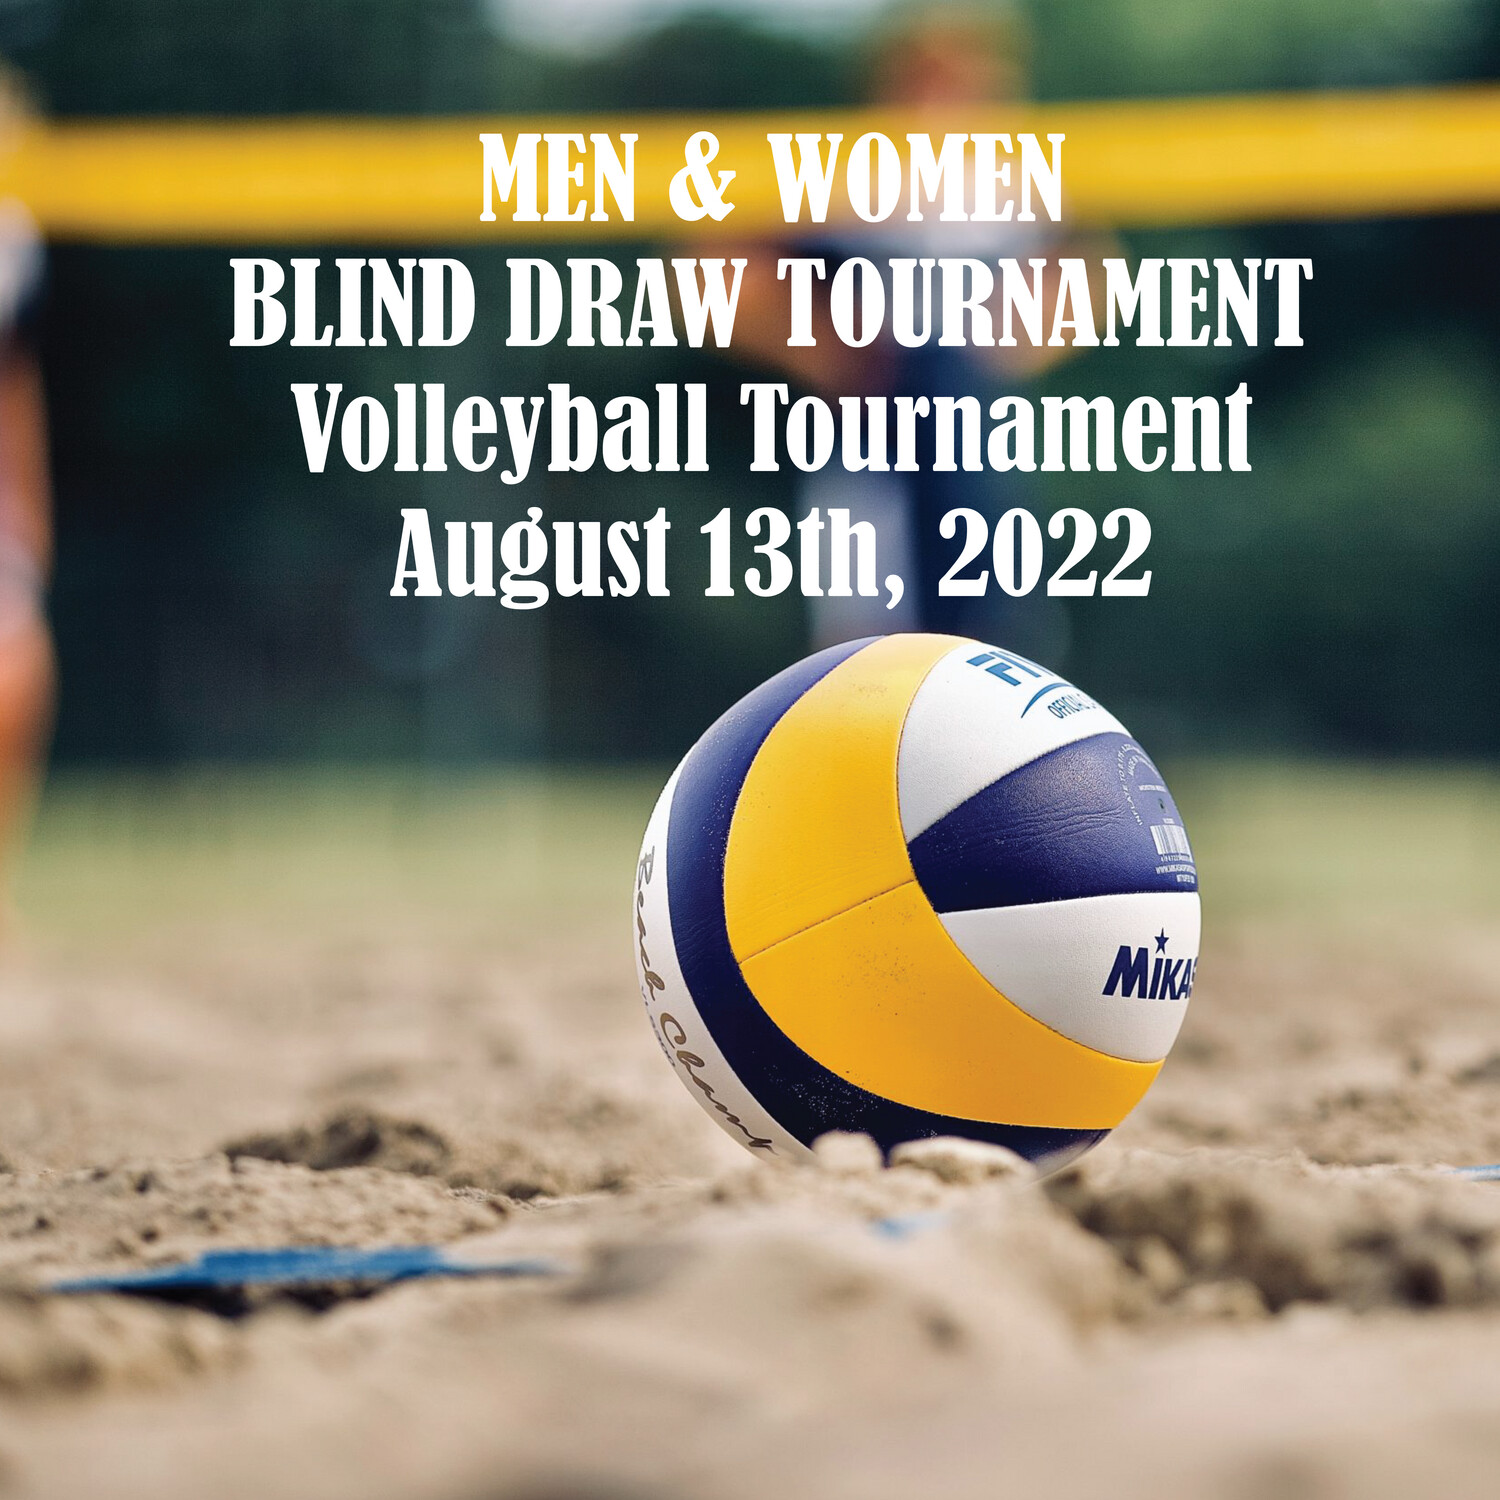 Men & Women Blind Draw Tournament - Soliday's August 13th, 2022